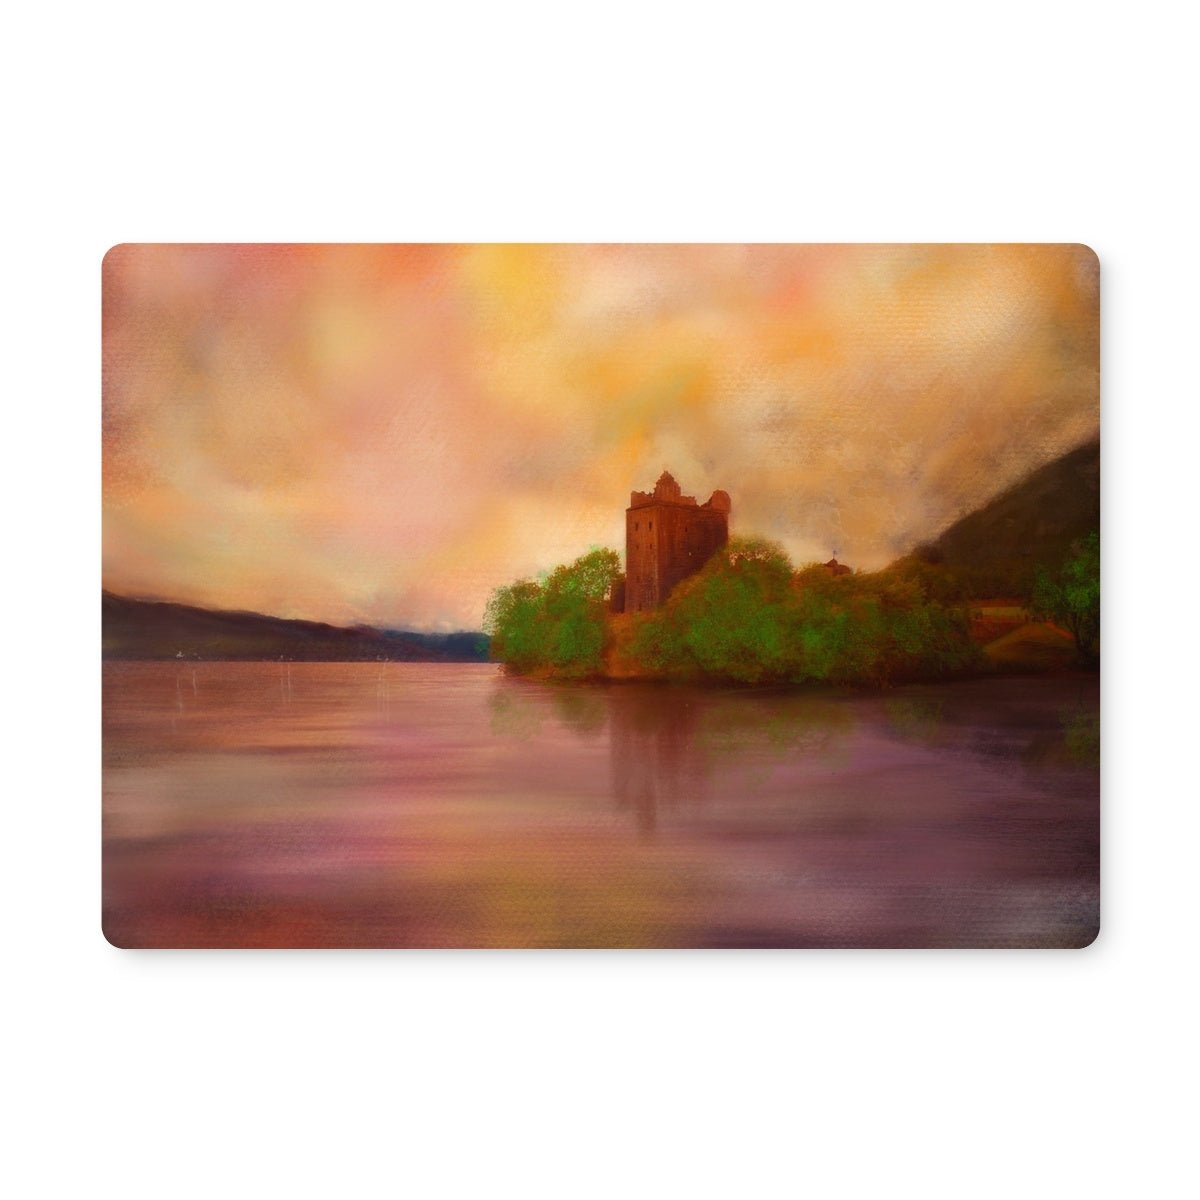 Urquhart Castle Art Gifts Placemat-Placemats-Historic & Iconic Scotland Art Gallery-2 Placemats-Paintings, Prints, Homeware, Art Gifts From Scotland By Scottish Artist Kevin Hunter